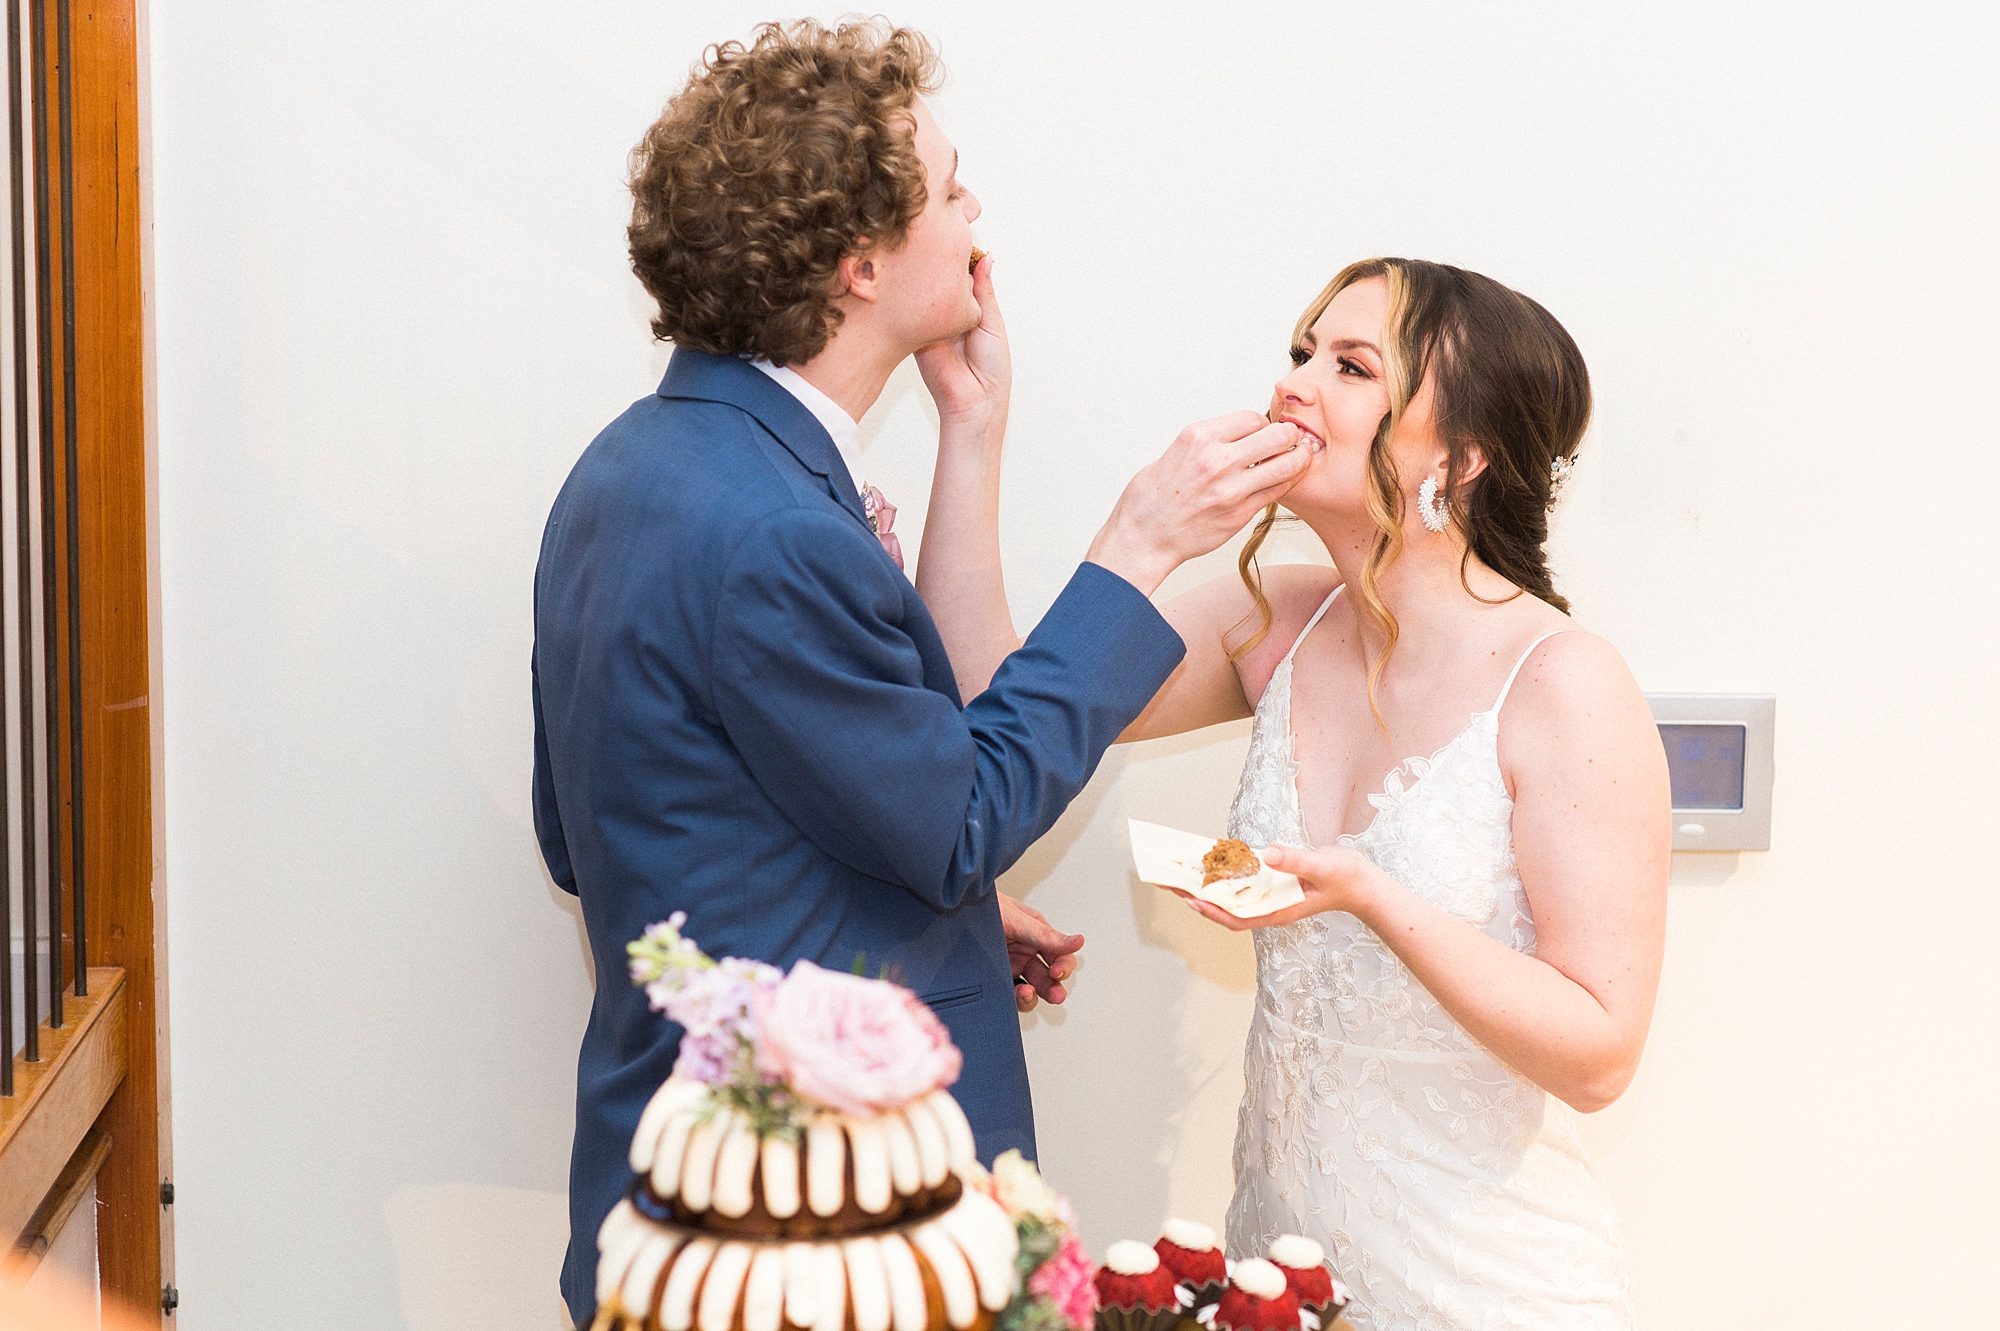 newlyweds feed each other cake during Raleigh NC wedding reception